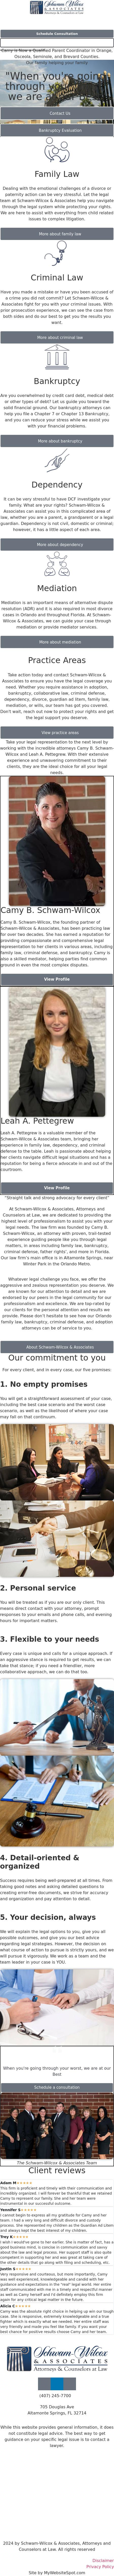 Schwam-Wilcox & Associates, Attorneys and Counselors at Law - Melbourne FL Lawyers